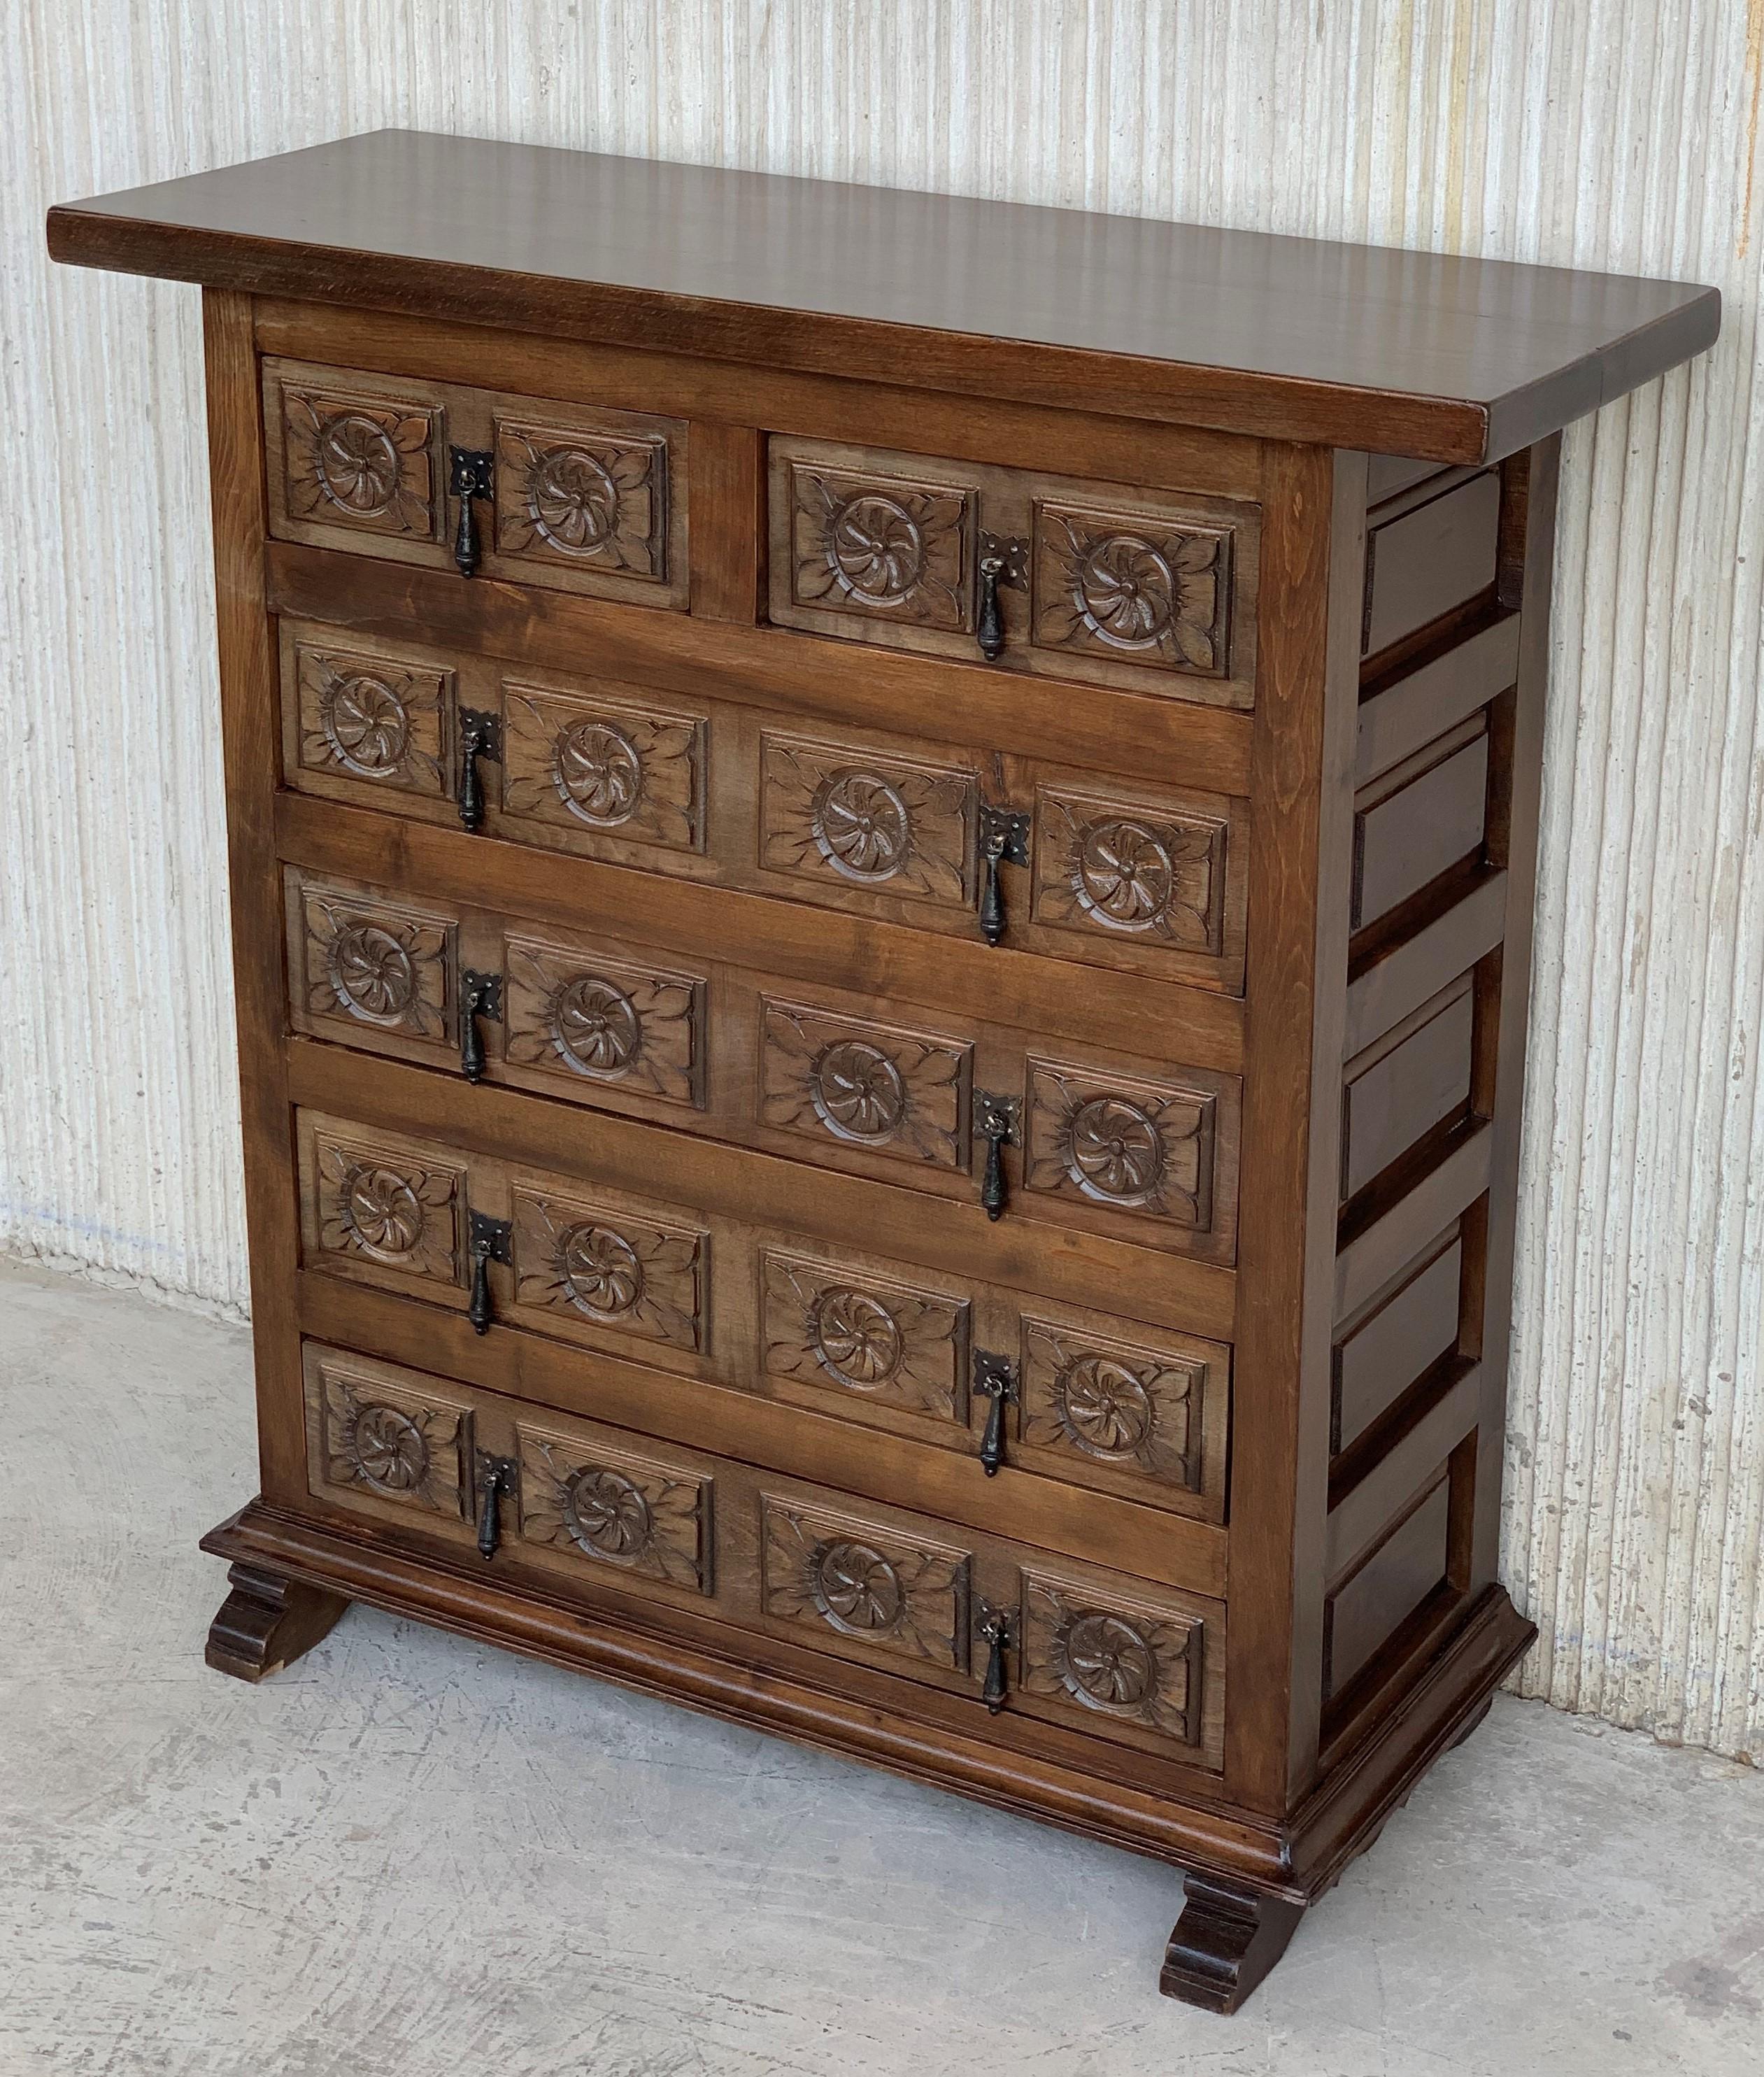 Spanish Colonial 19th Catalan Spanish Carved Walnut Chest of Drawers, Highboy or Console